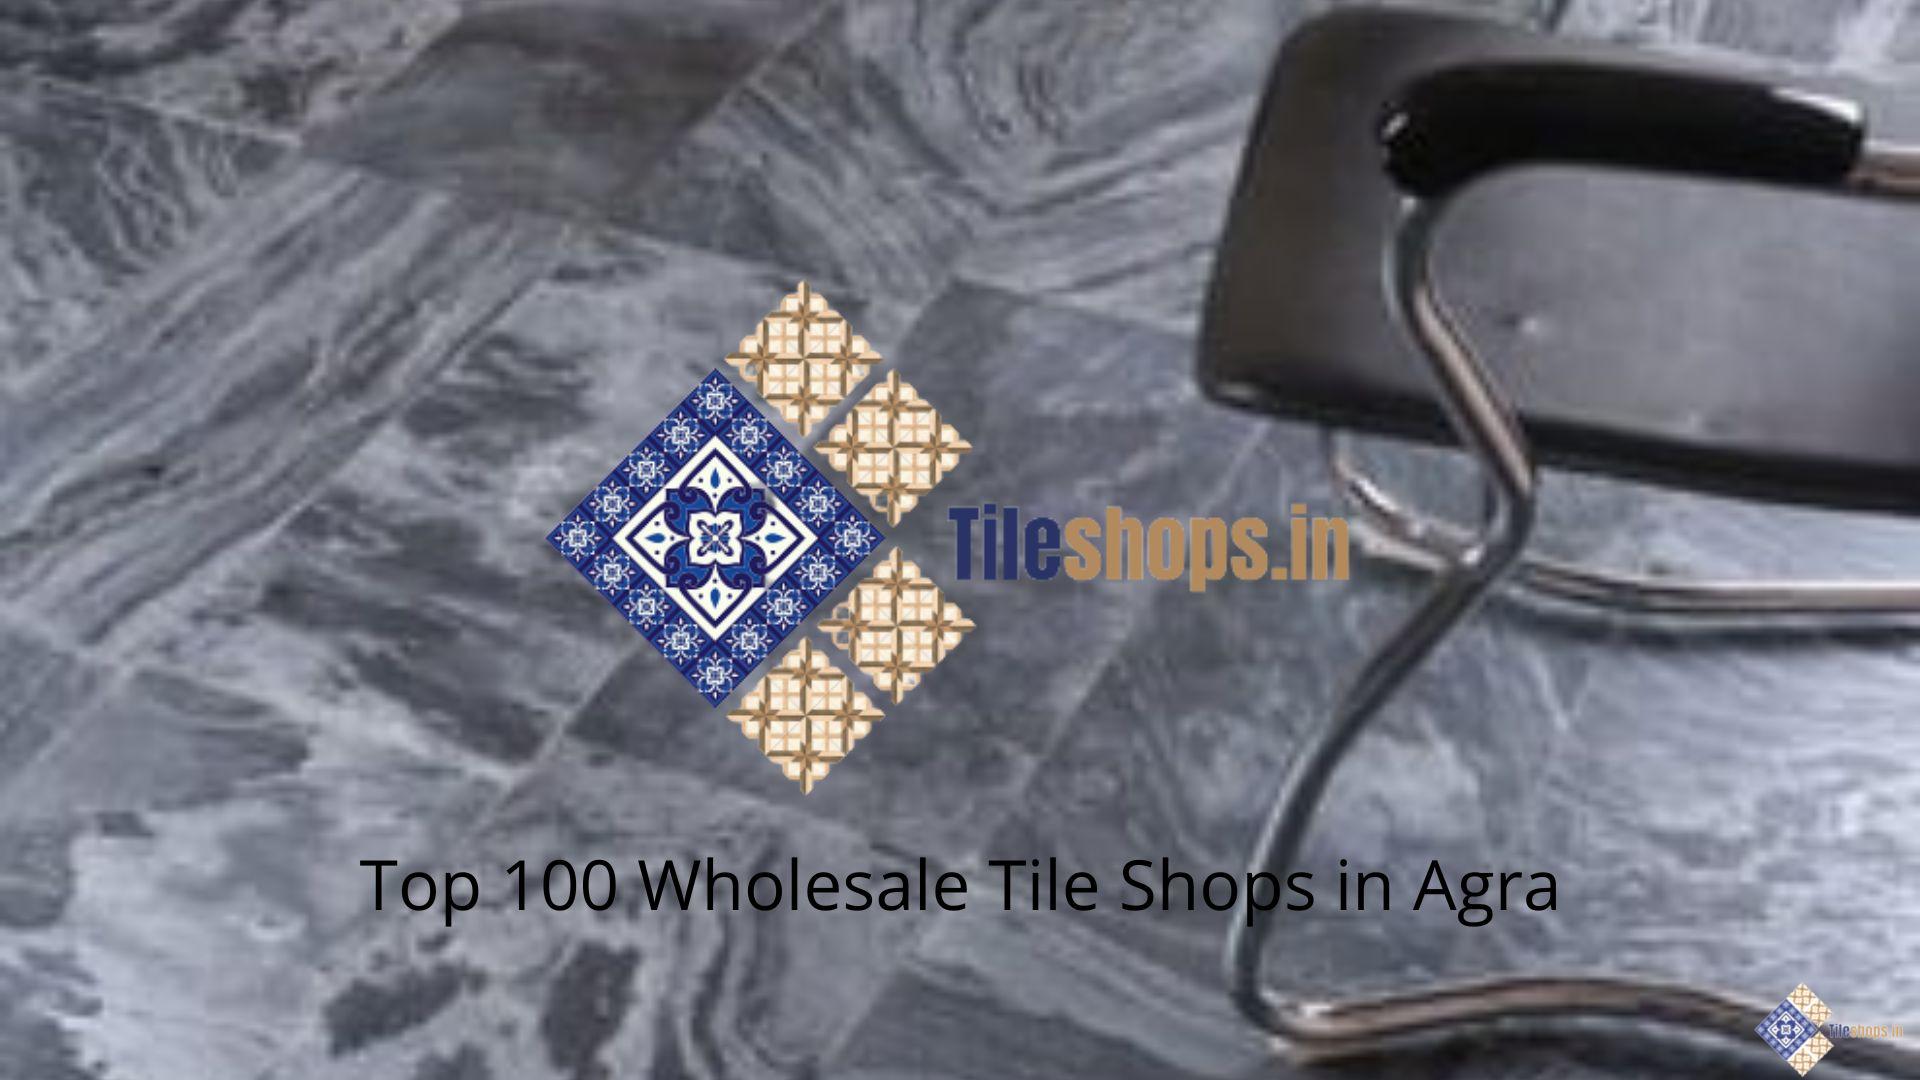 Top 100 Wholesale Tile Shops in Agra